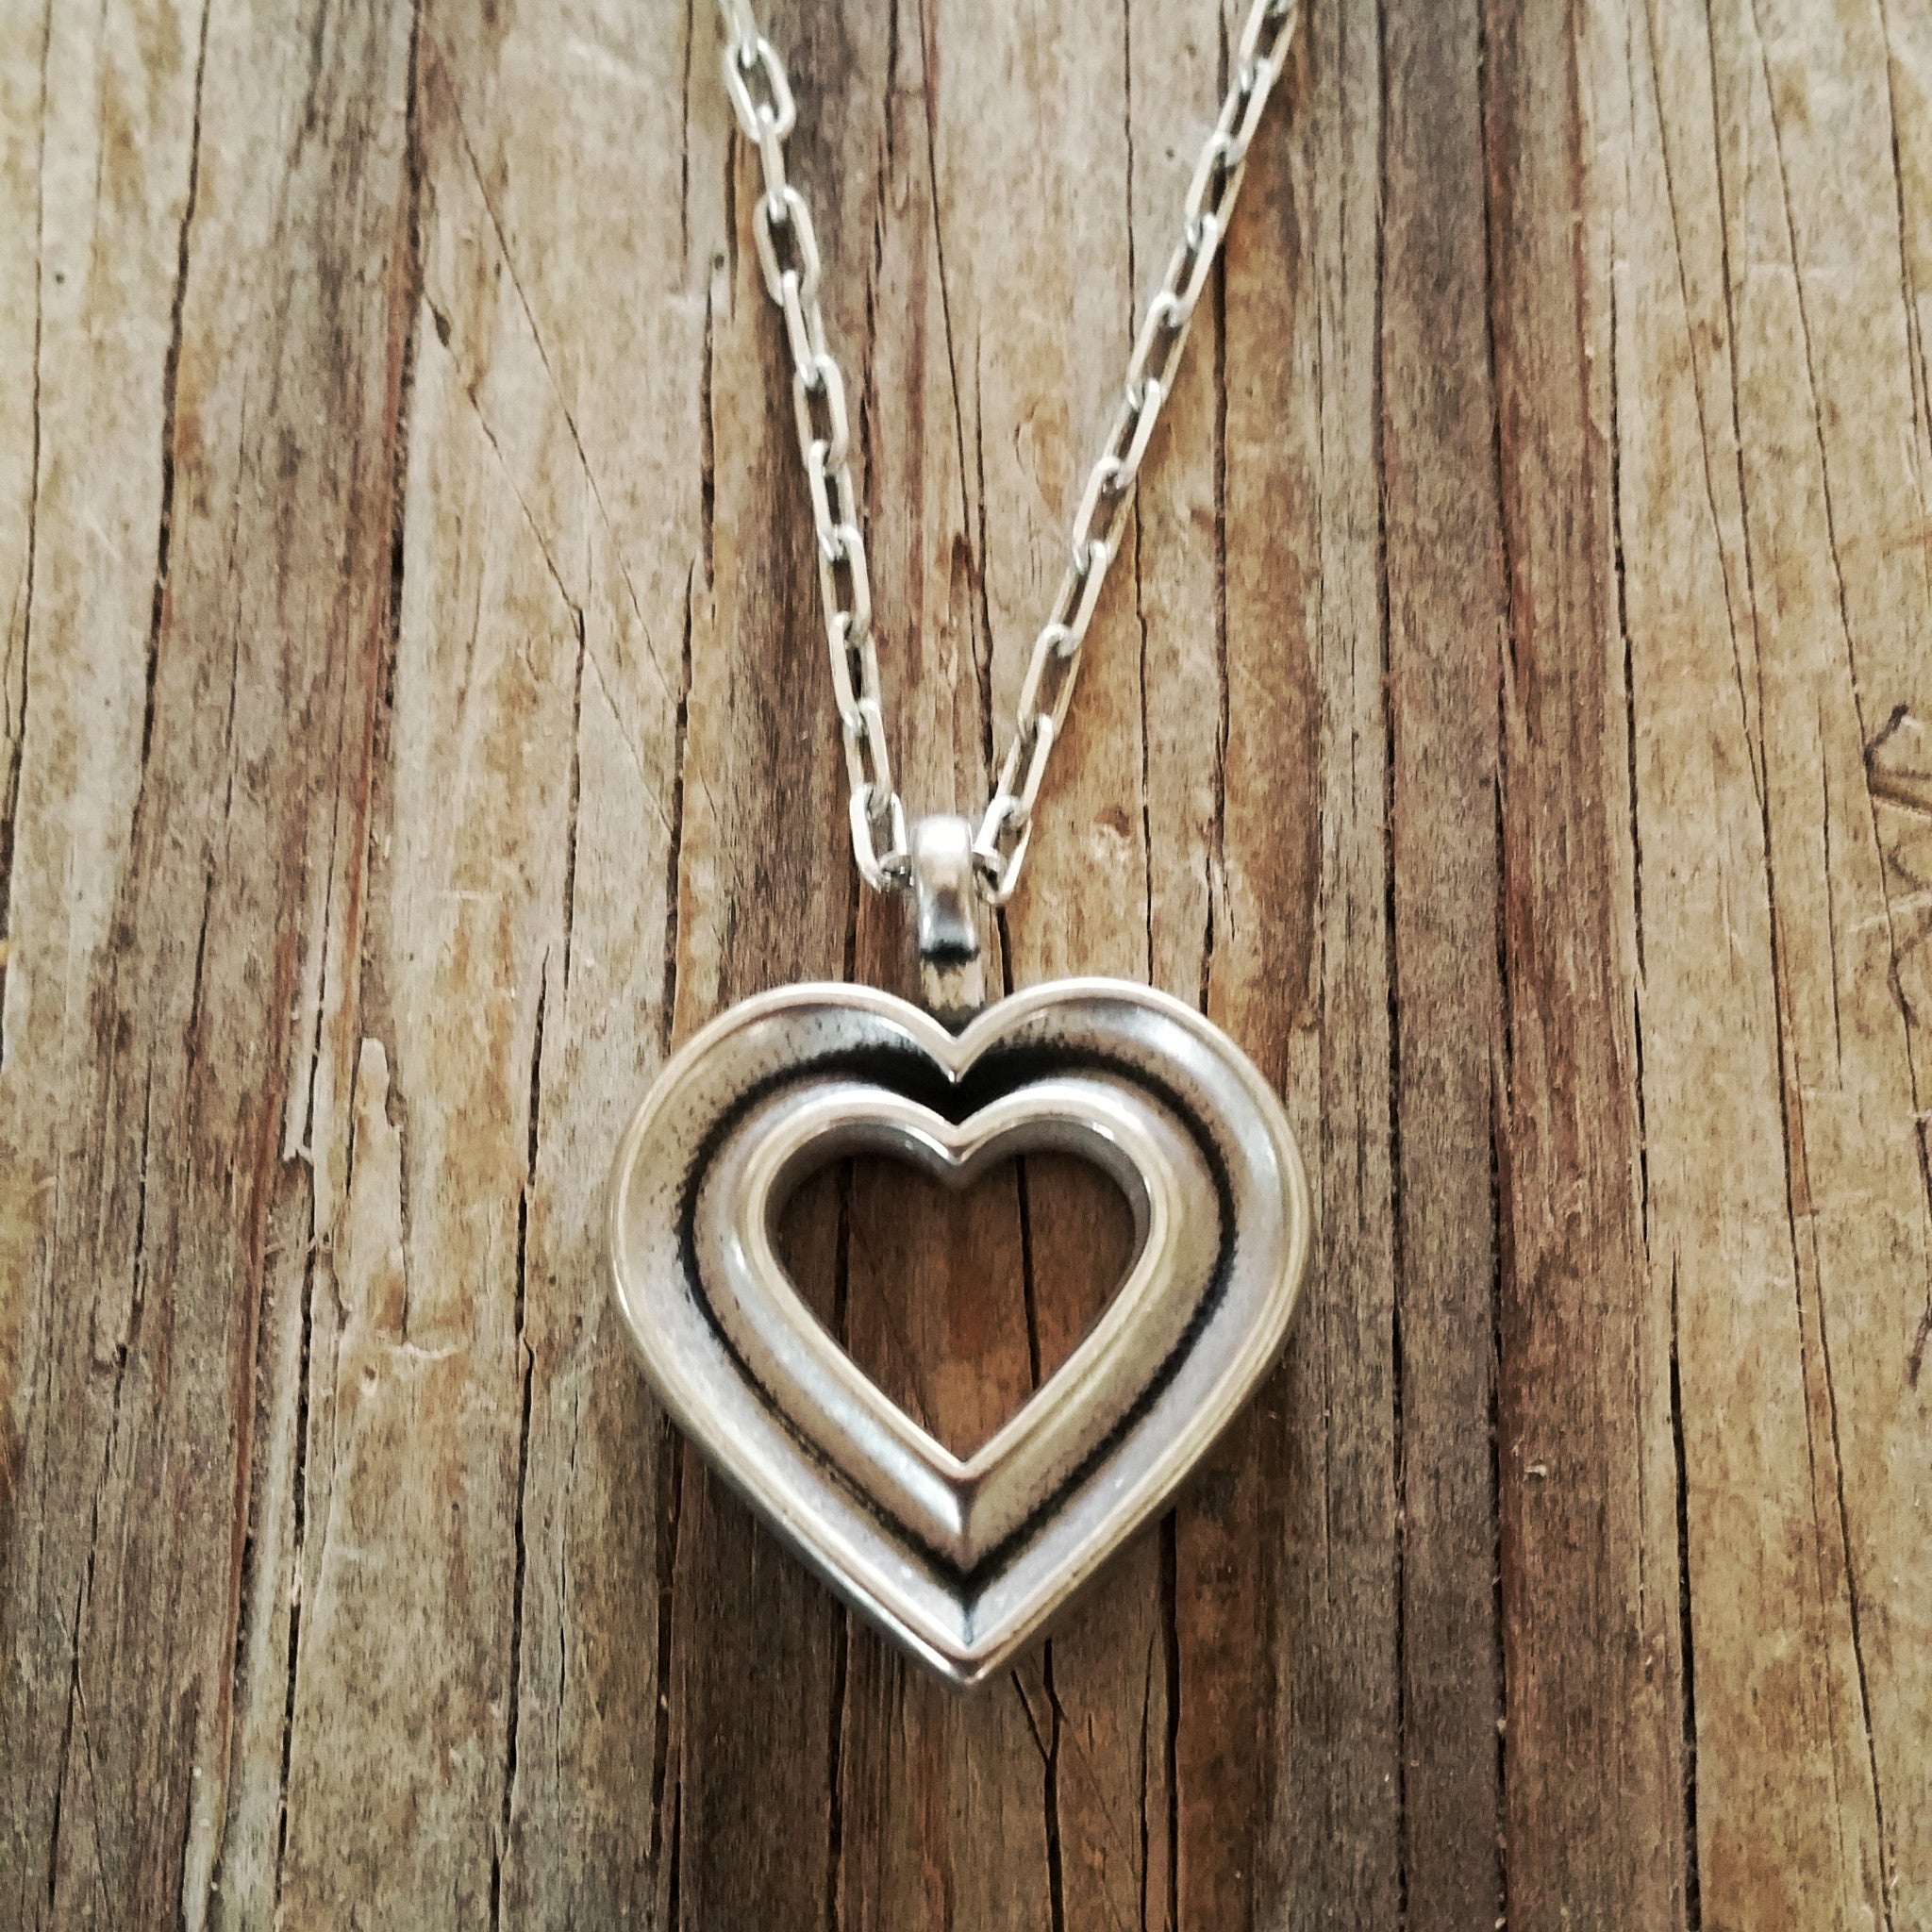 LOVE Heartbeat Necklace - Sterling Silver HONOR EMBLEM Jewelry